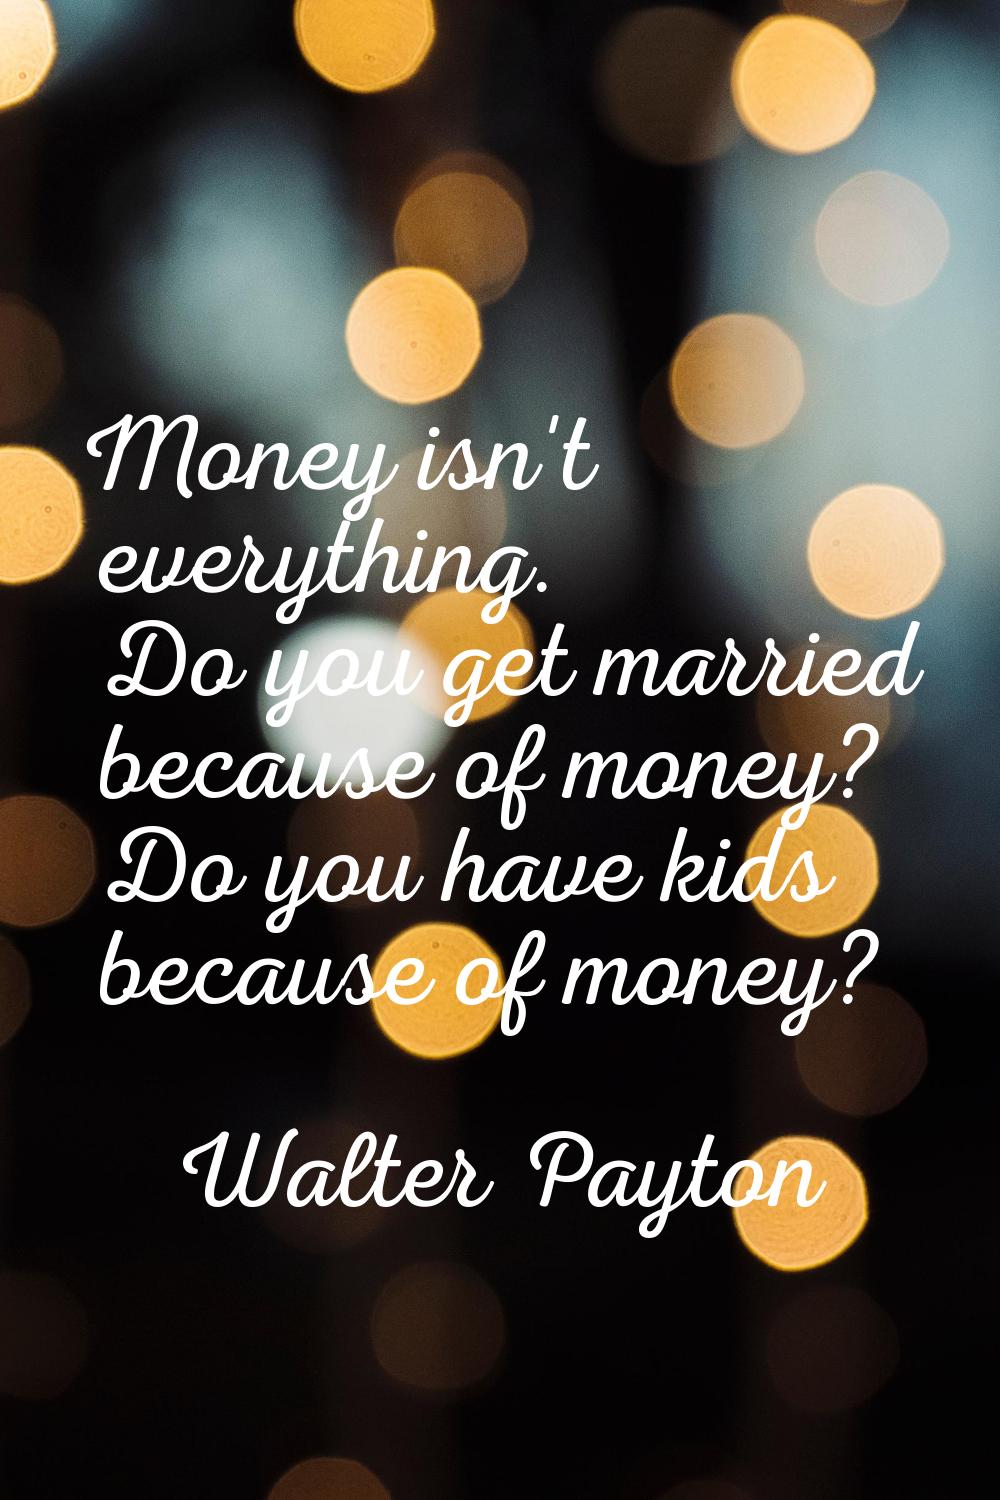 Money isn't everything. Do you get married because of money? Do you have kids because of money?